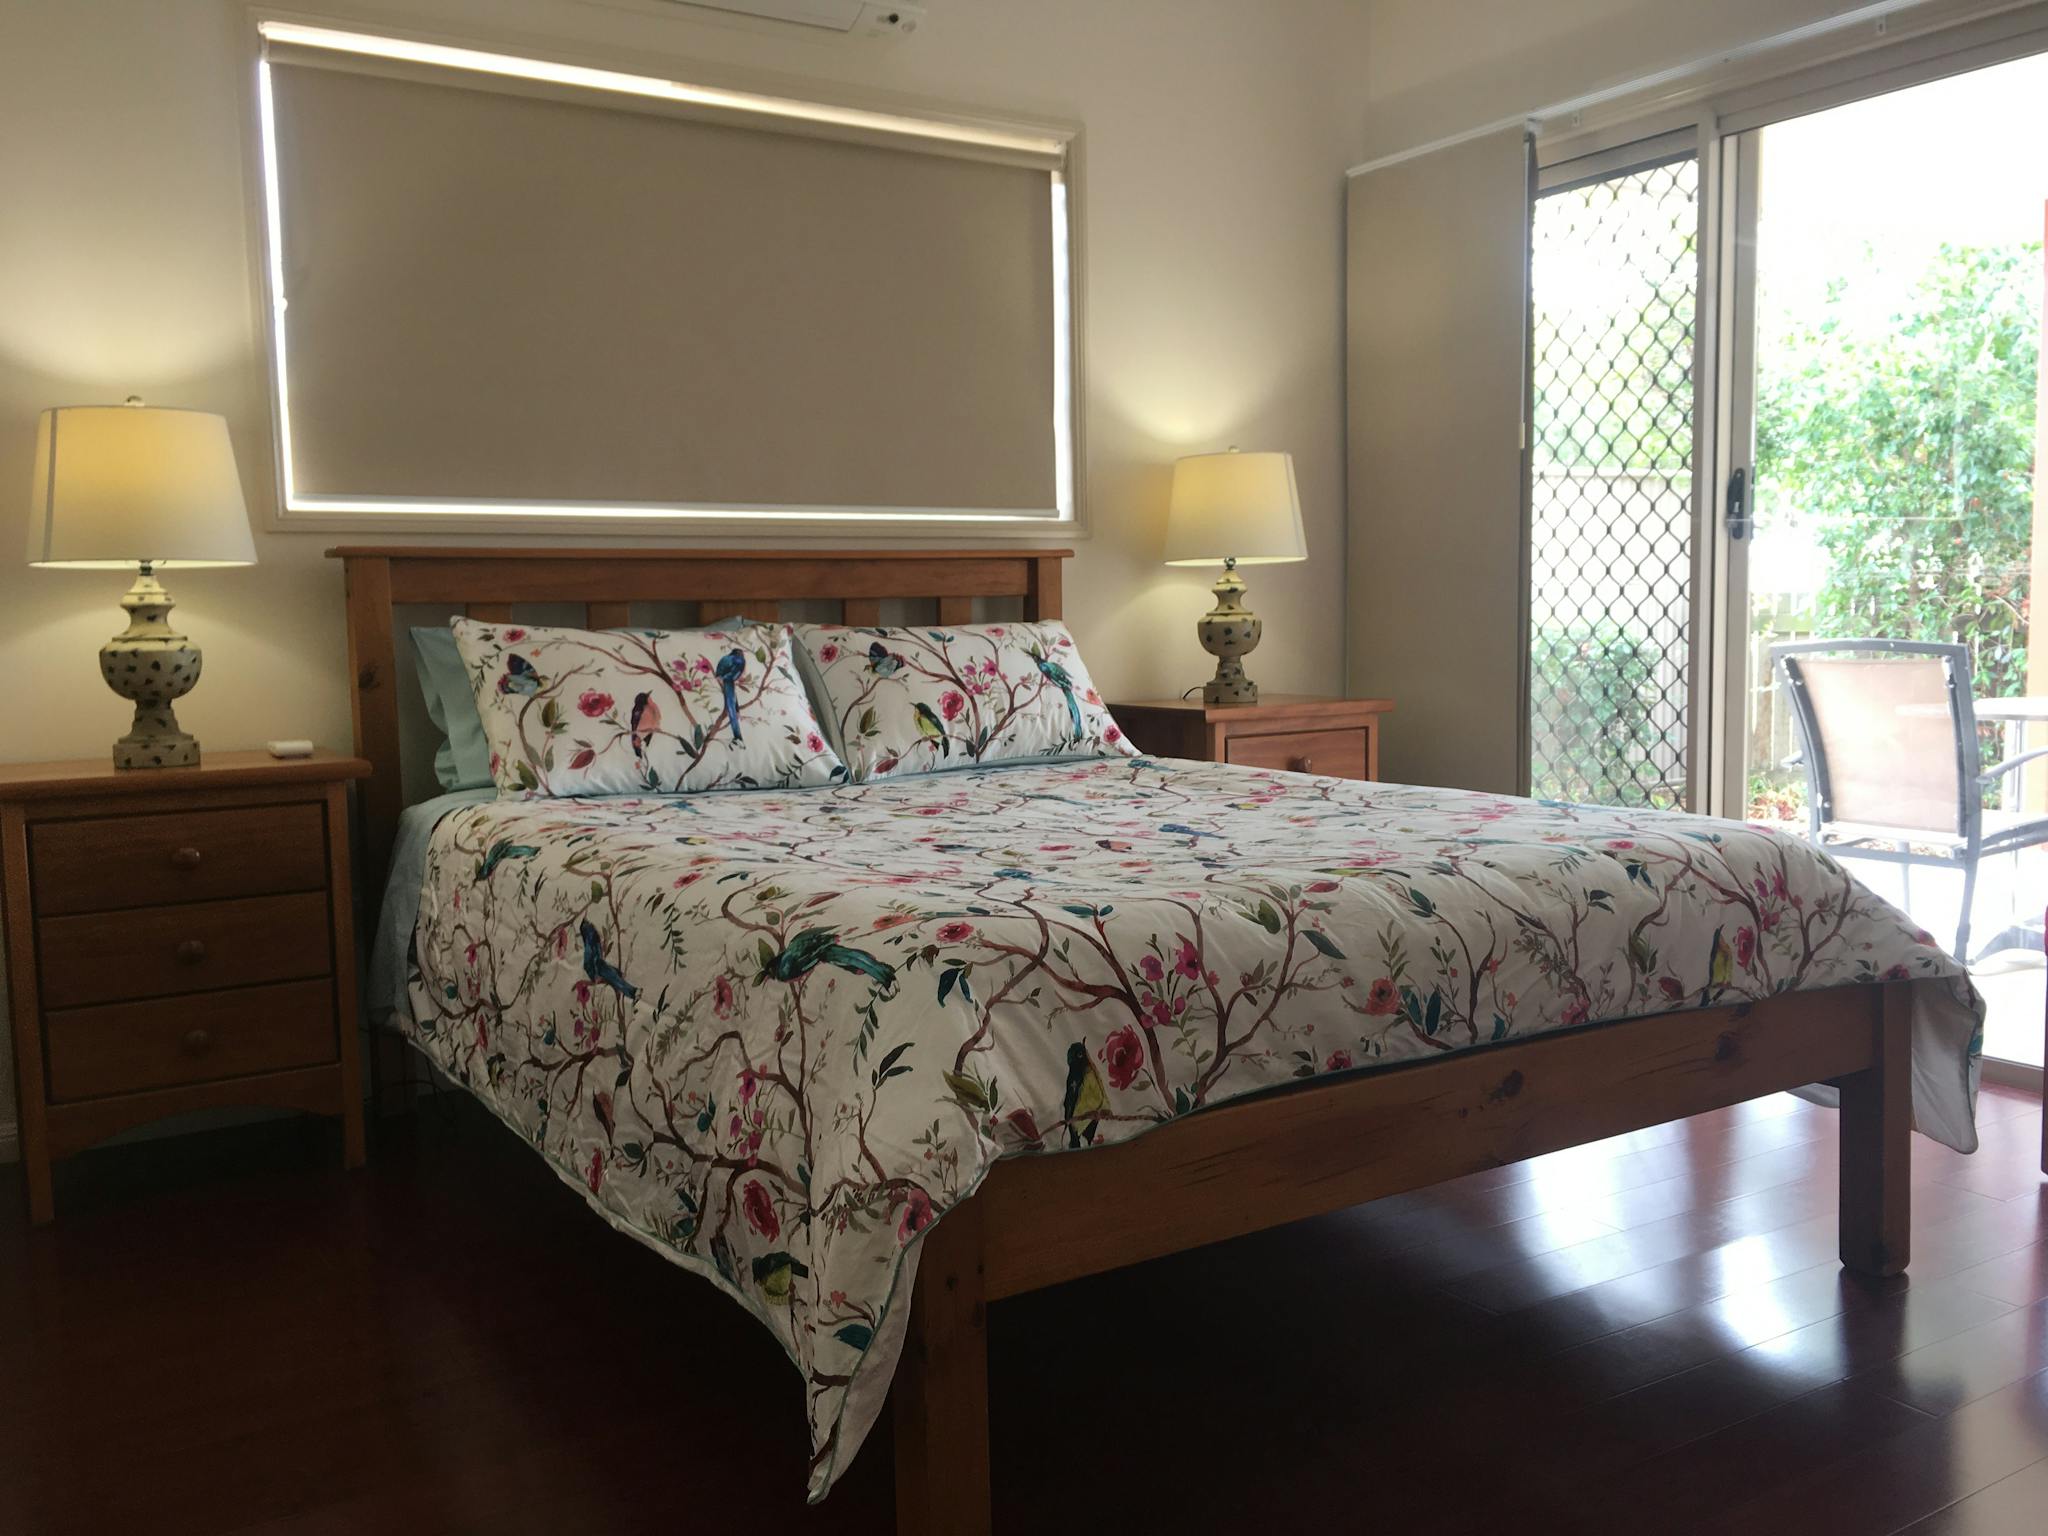 89_on_Guy_Bedroom_2_as_part _of_accommodation_warwick_qld_2bd_guest_house